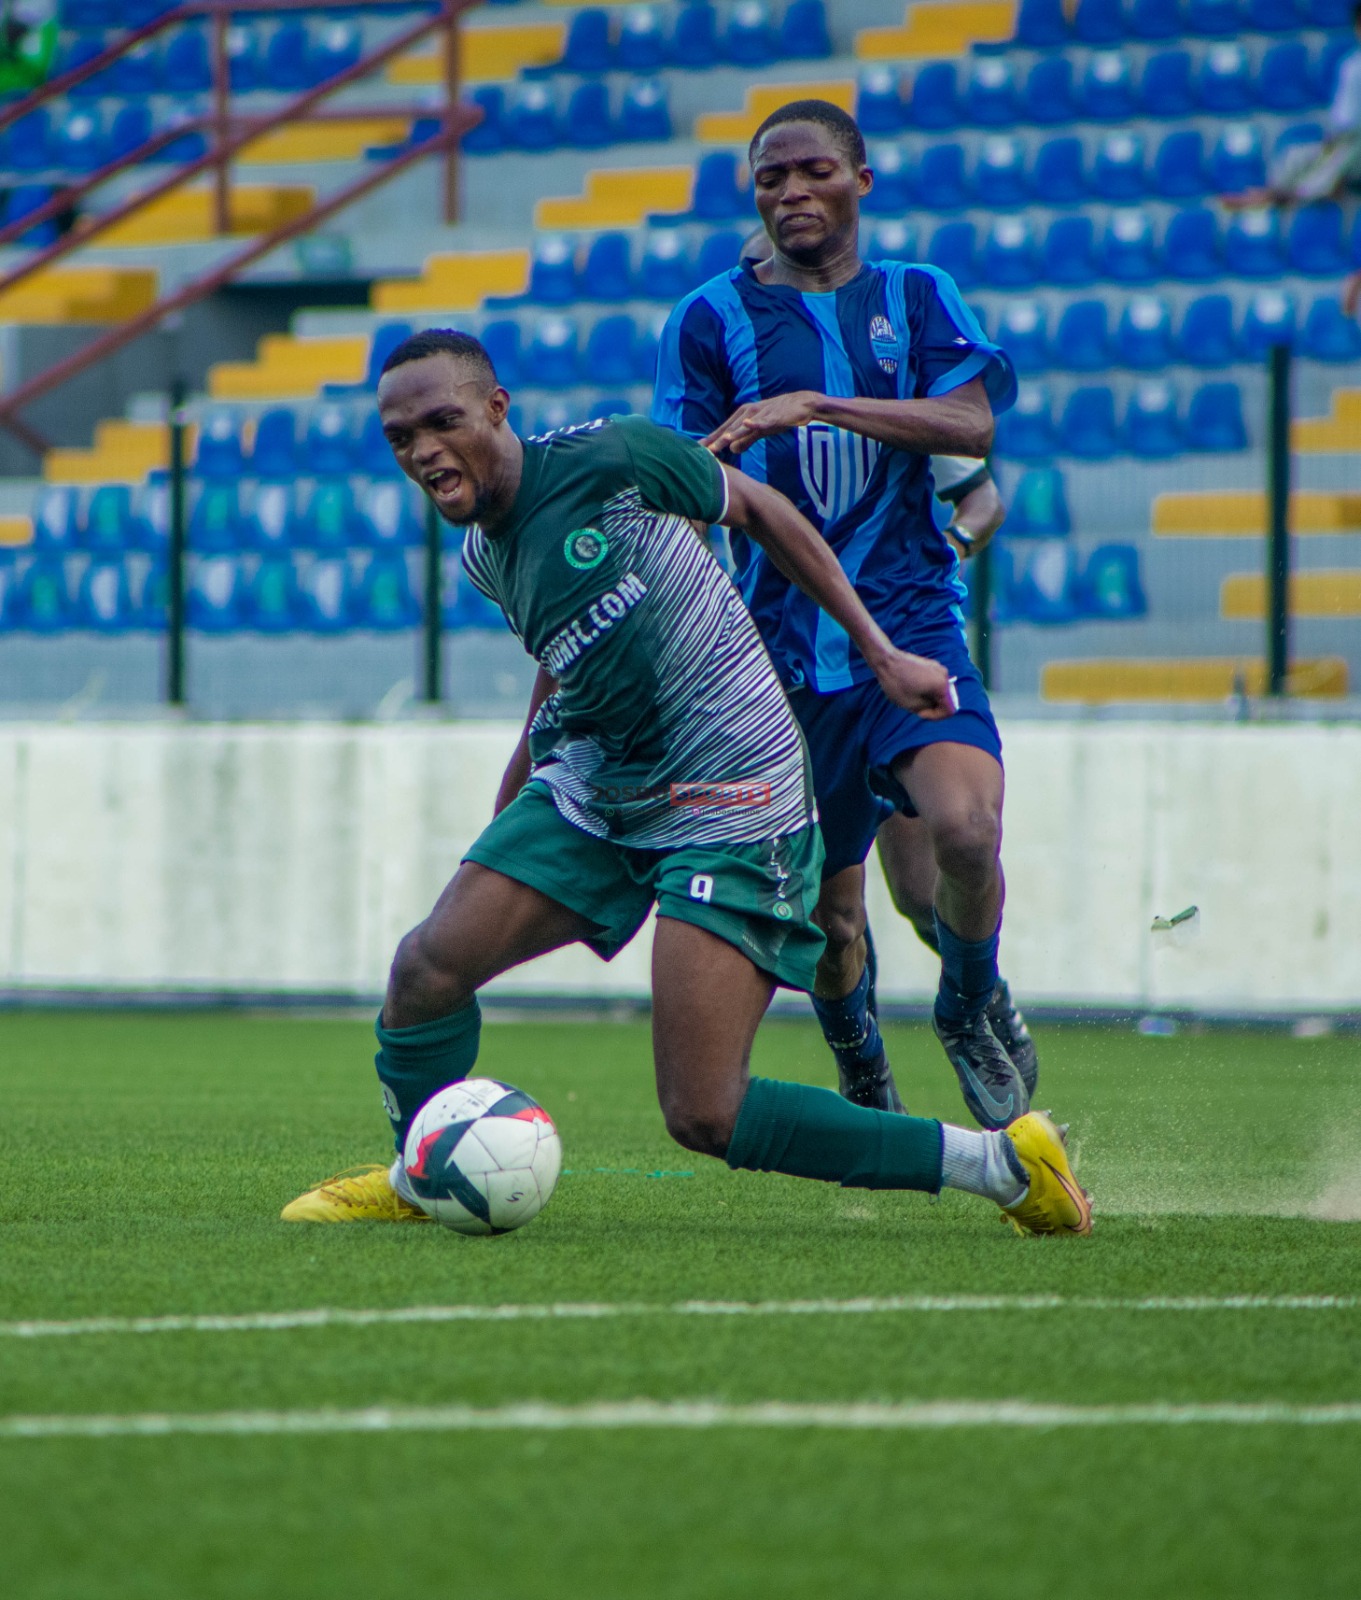 Smart City and 36 Lions Advance to Jagaban Cup Final, While Charlesann and Dino Compete for Third Place